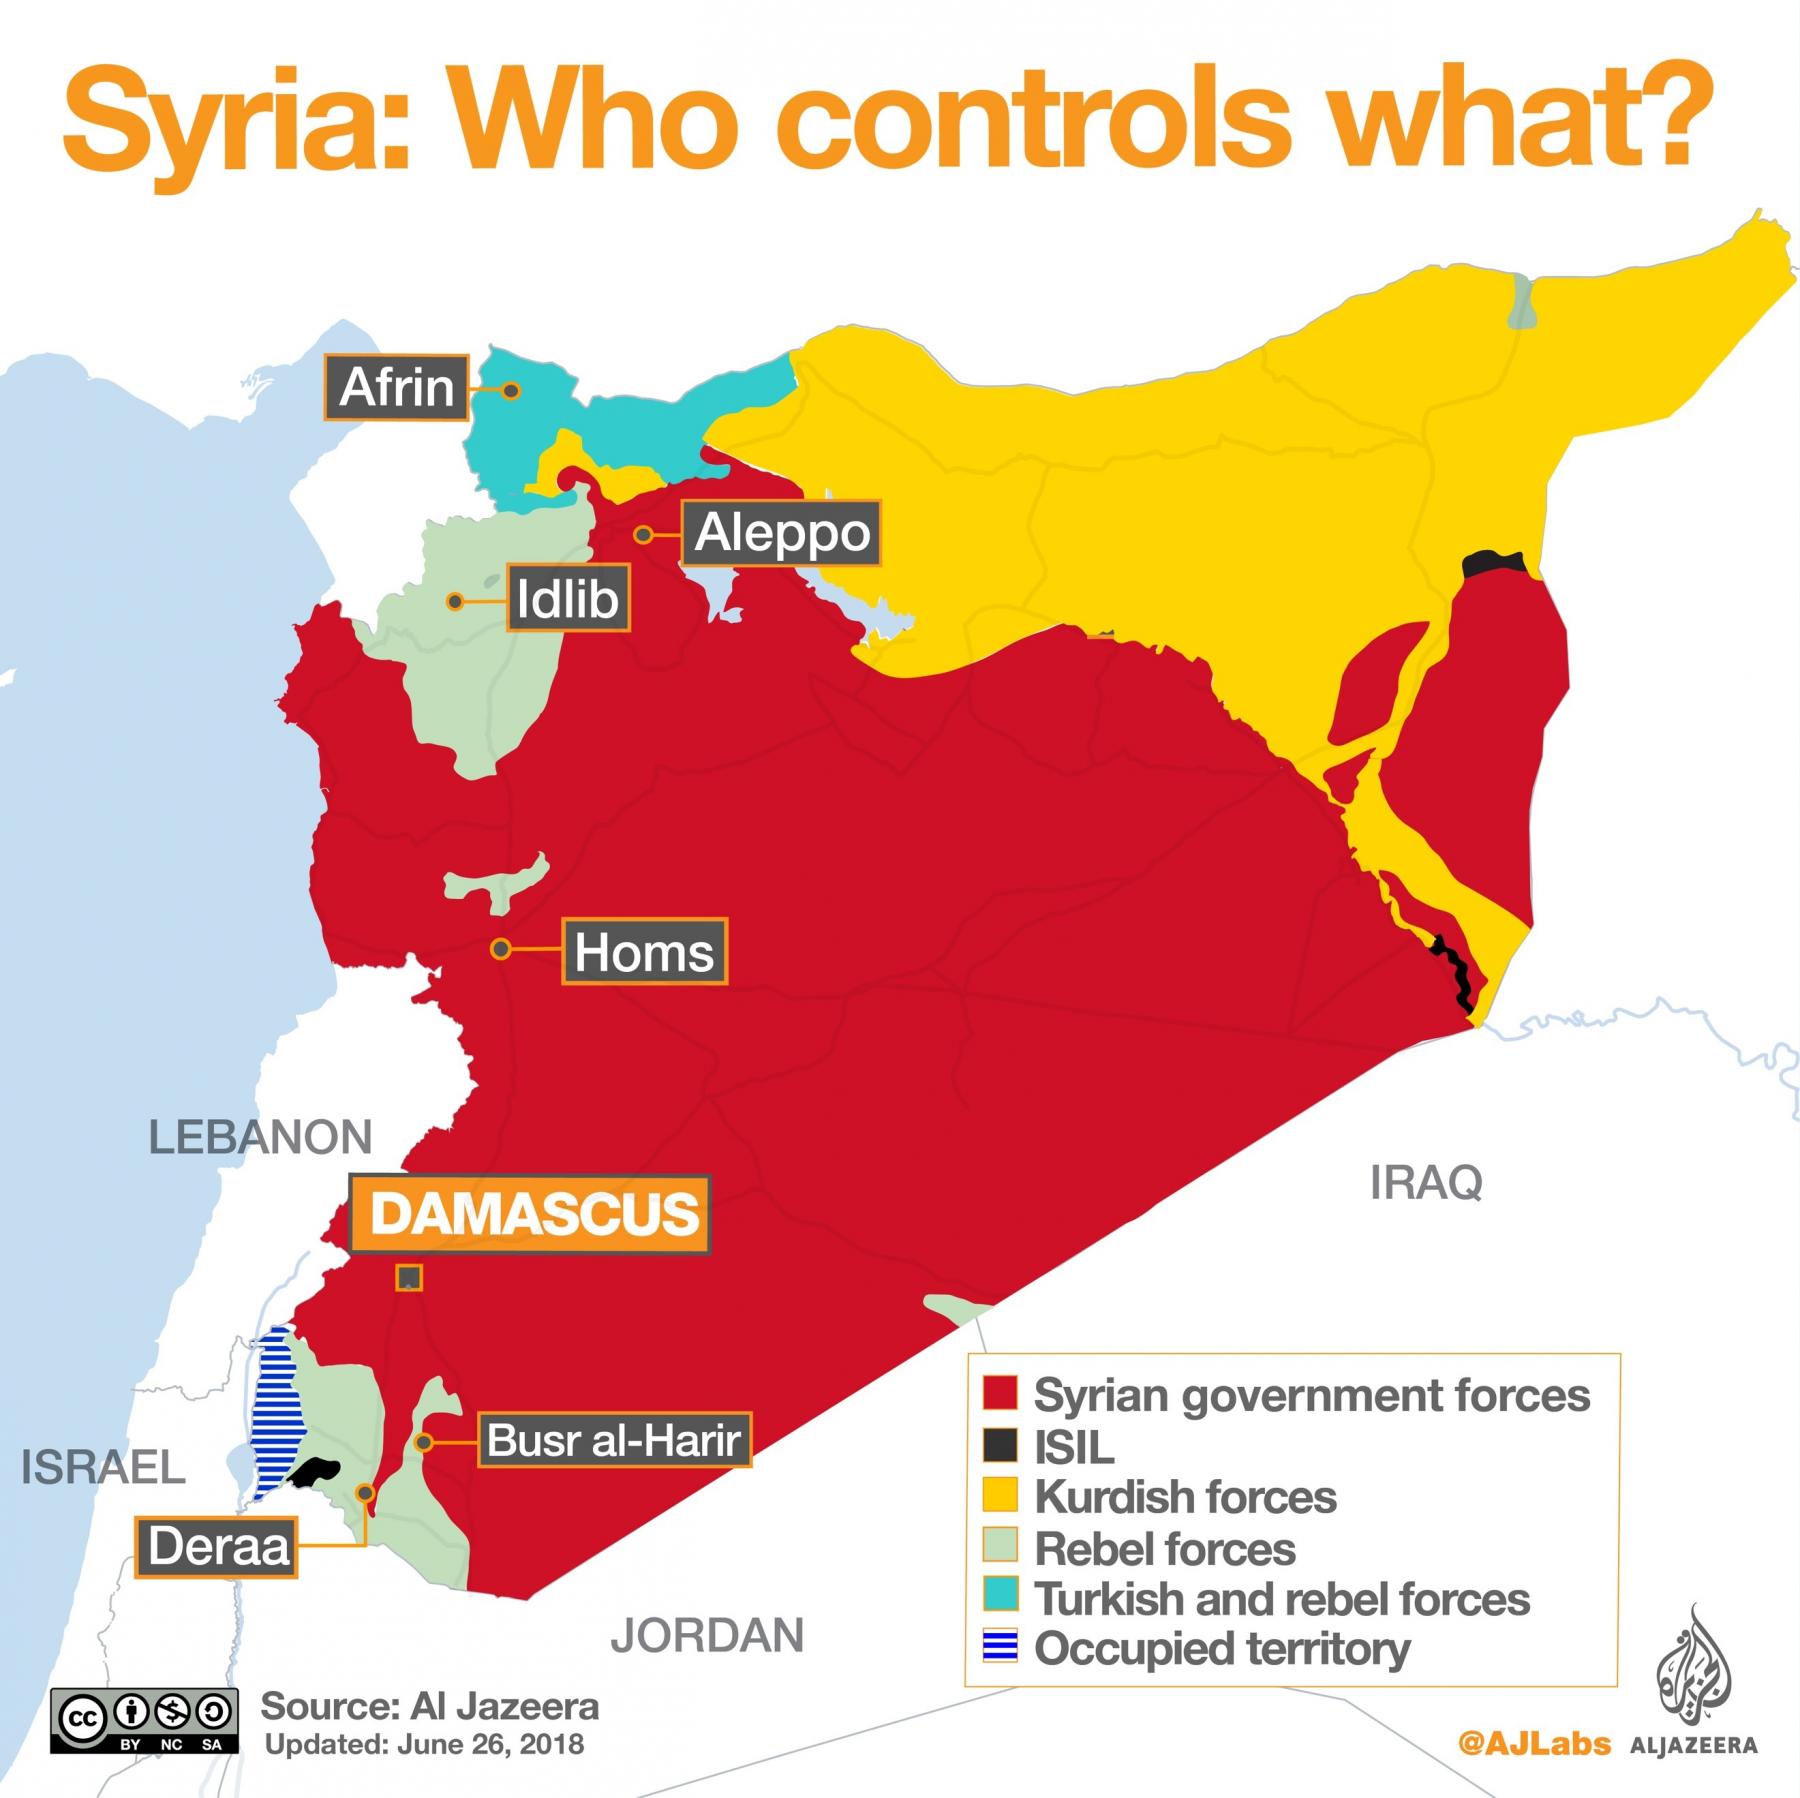 Who controls which areas of Syria